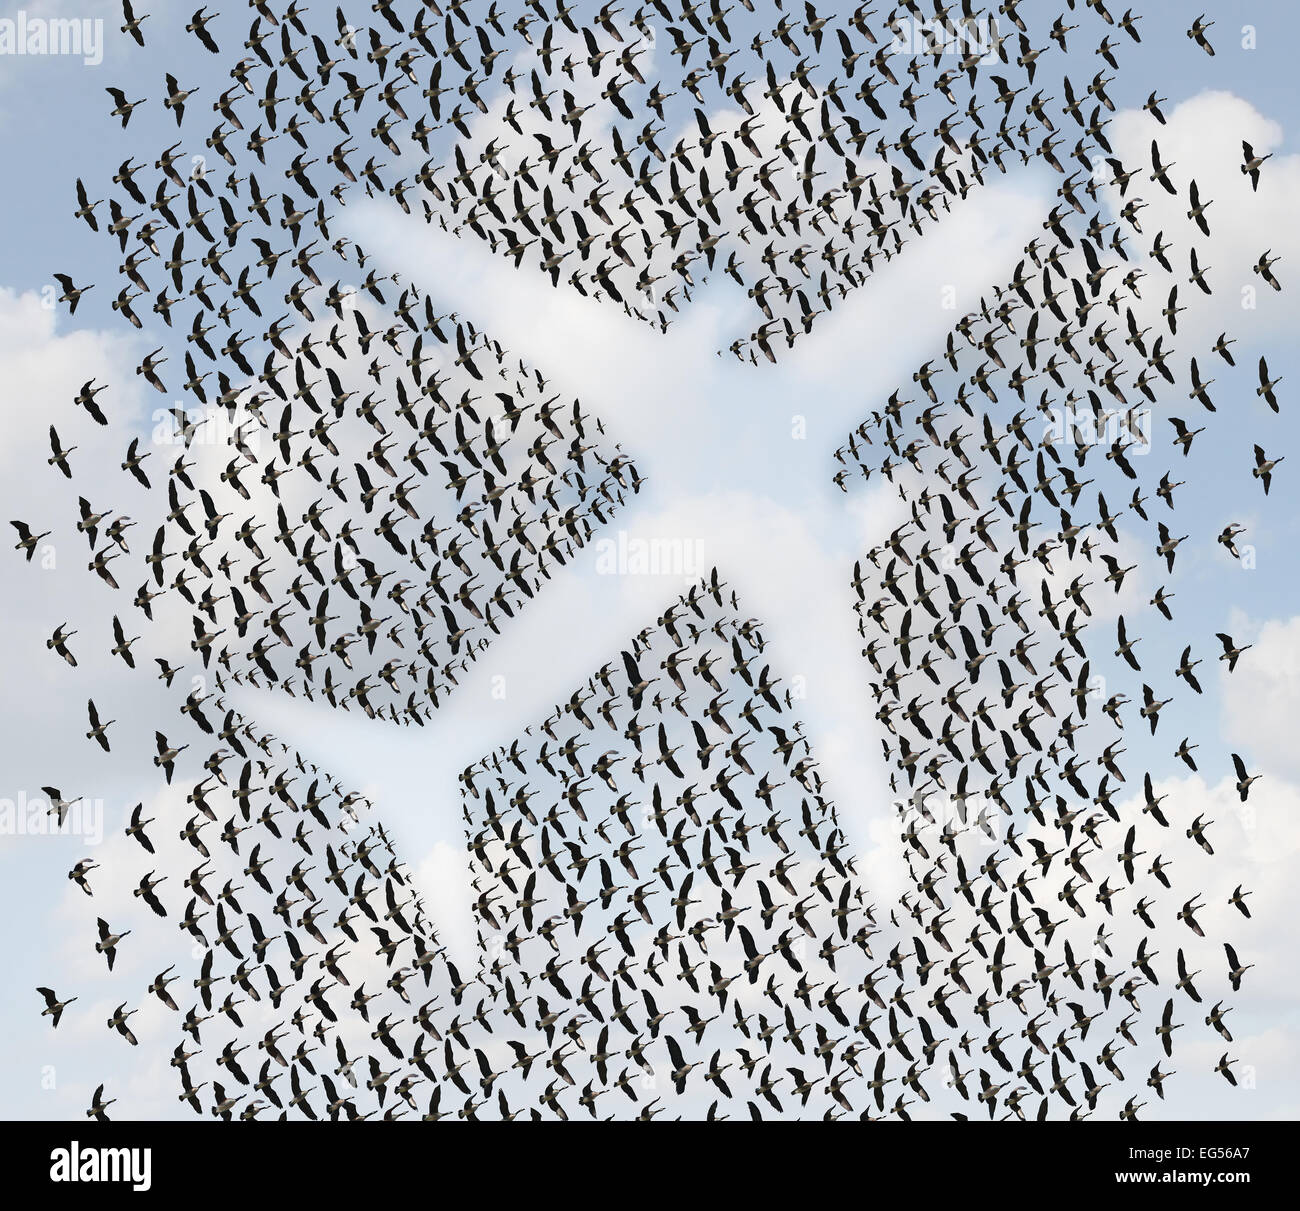 Air travel concept as a flock of flying birds or geese organized in the shape of a passenger airplane jet as an aviation transport and transportation symbol. Stock Photo